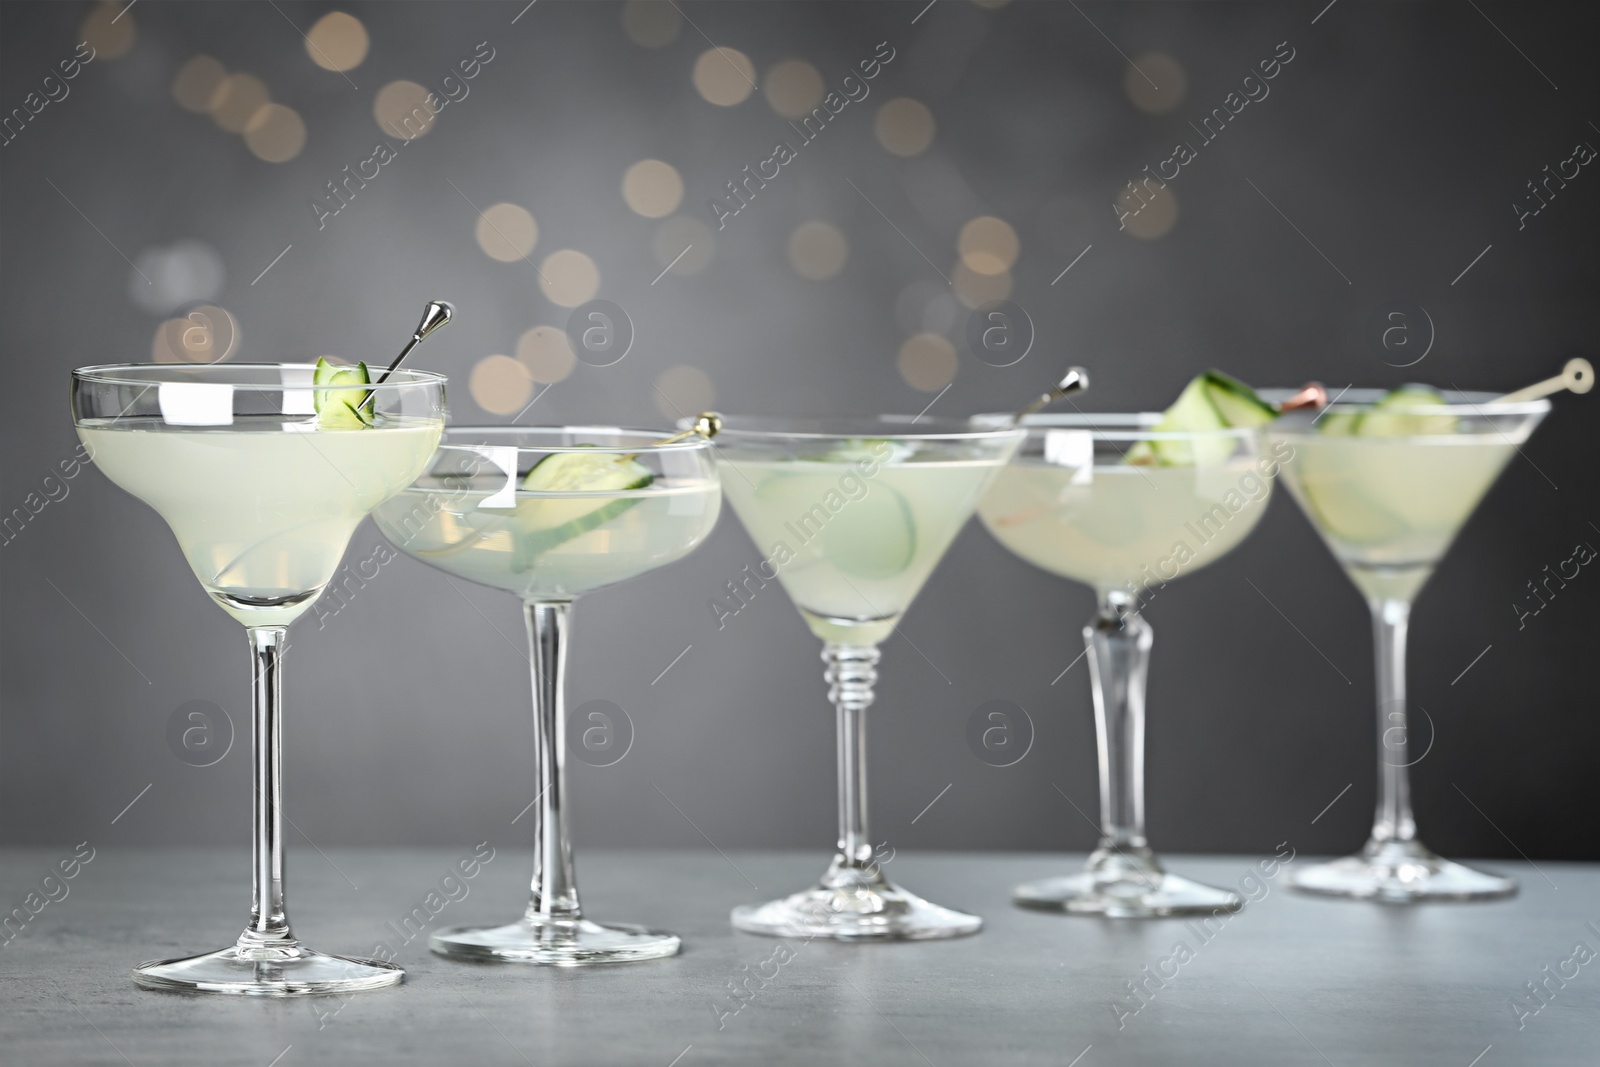 Photo of Glasses of martini with cucumber on grey table against blurred lights